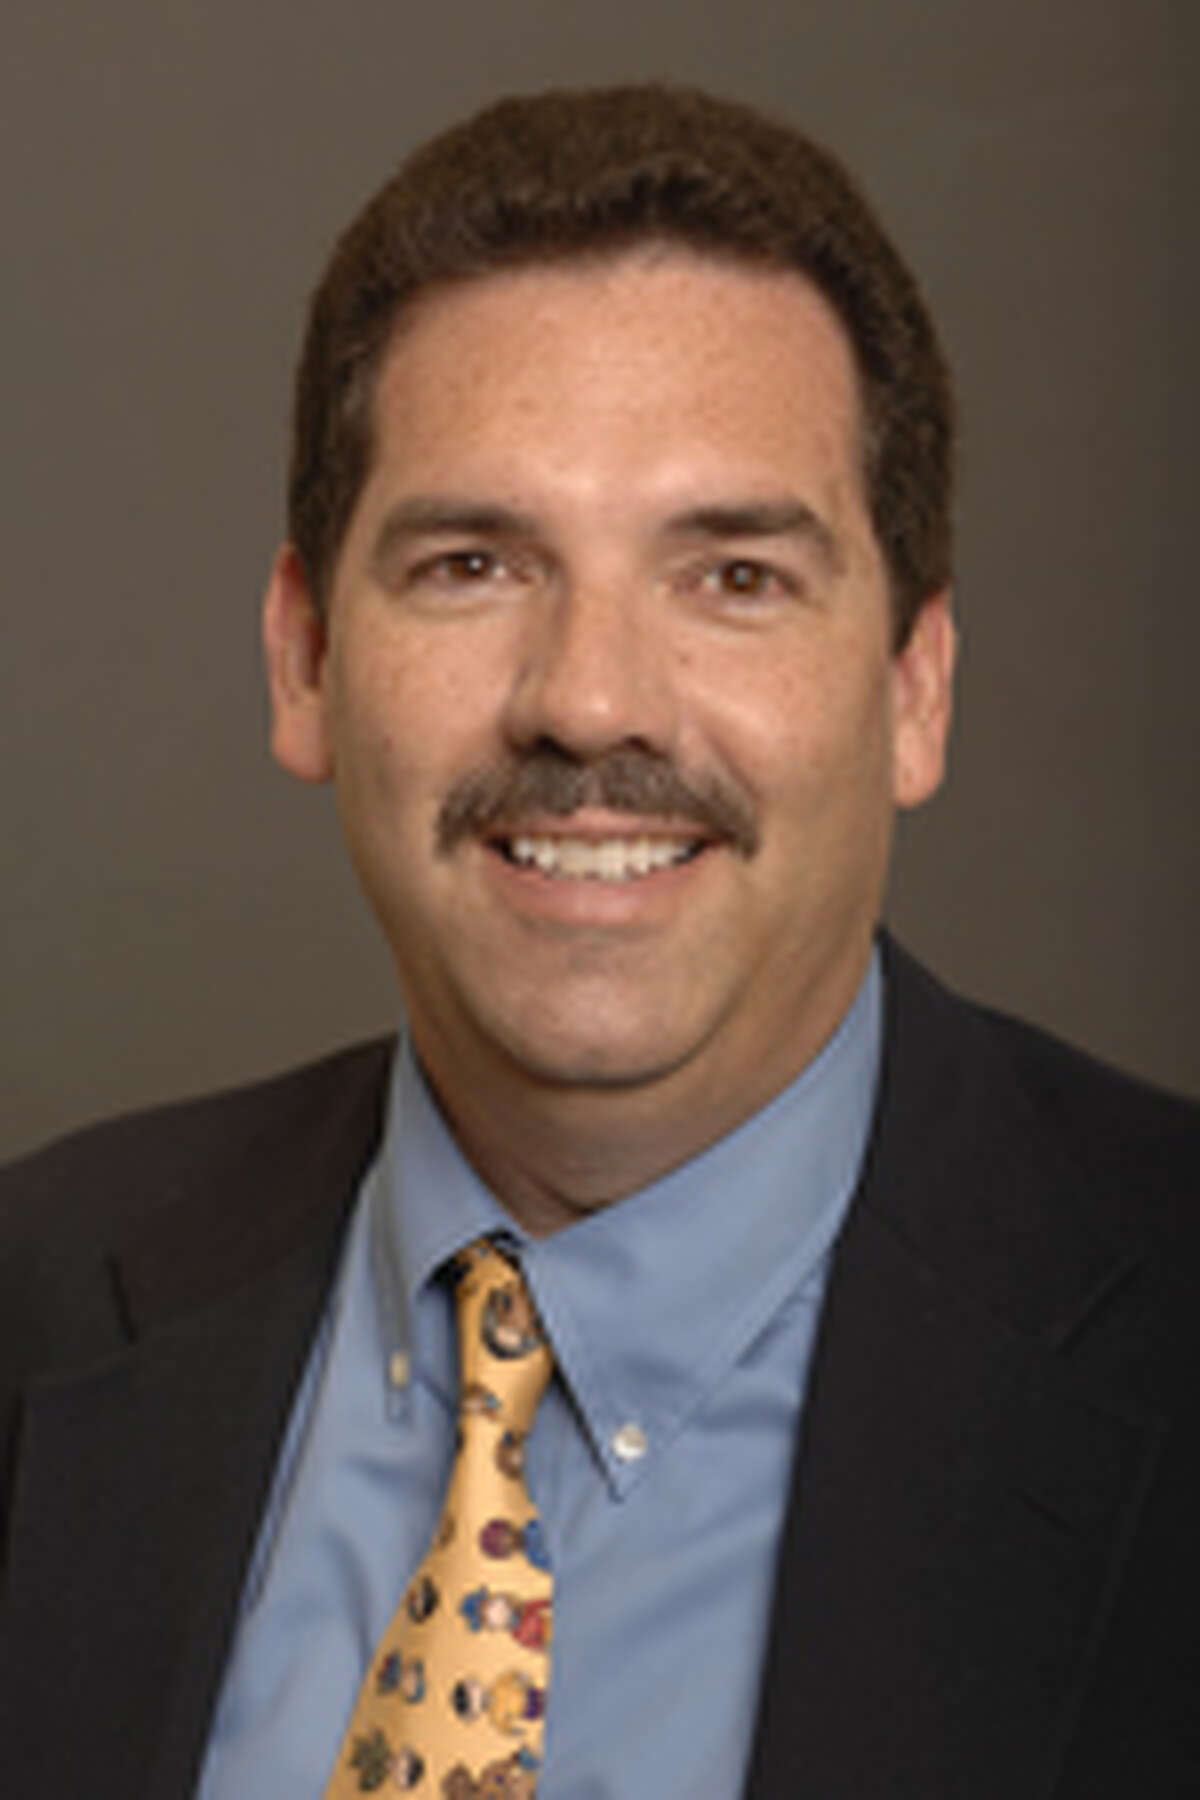 Scott Muri, a former teacher and principal, is Deputy Superintendent of Academics at Fulton County Schools in Atlanta, Georgia. He was one of two finalists chosen for the San Antonio ISD superintendent post at a school board meeting April 13, 2015.